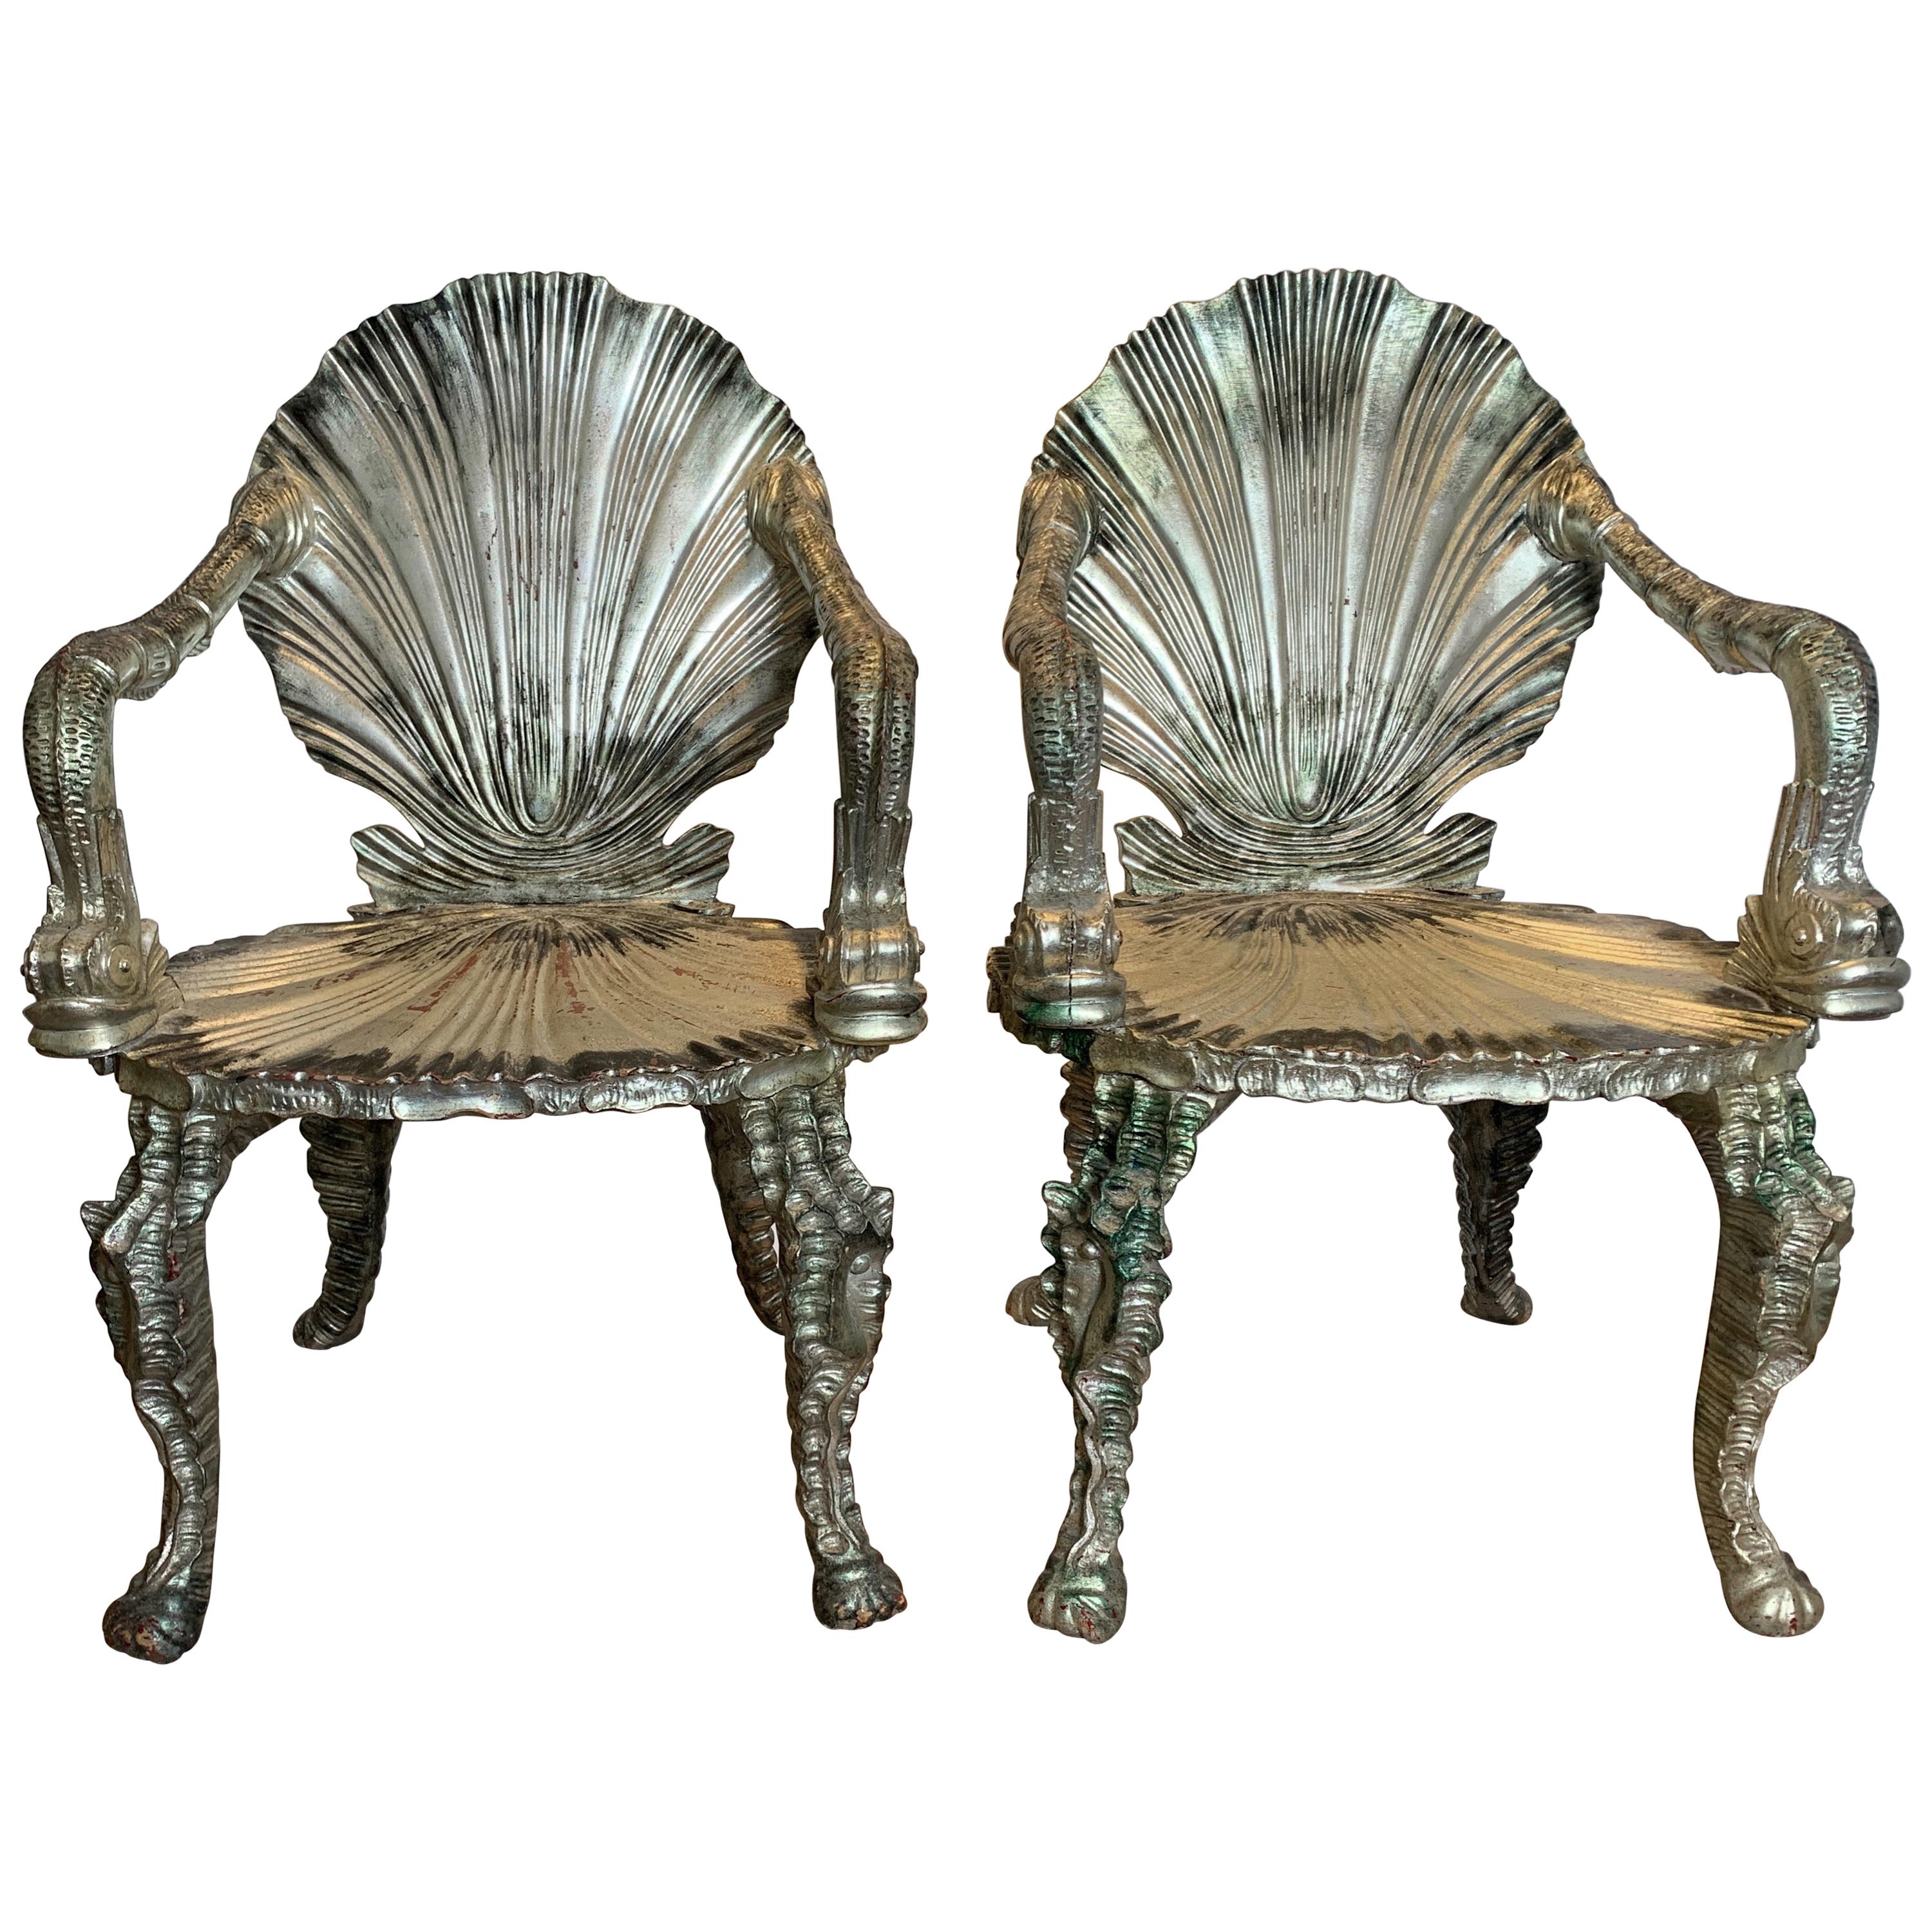 Pair of Antique Silver Leaf Grotto Chairs